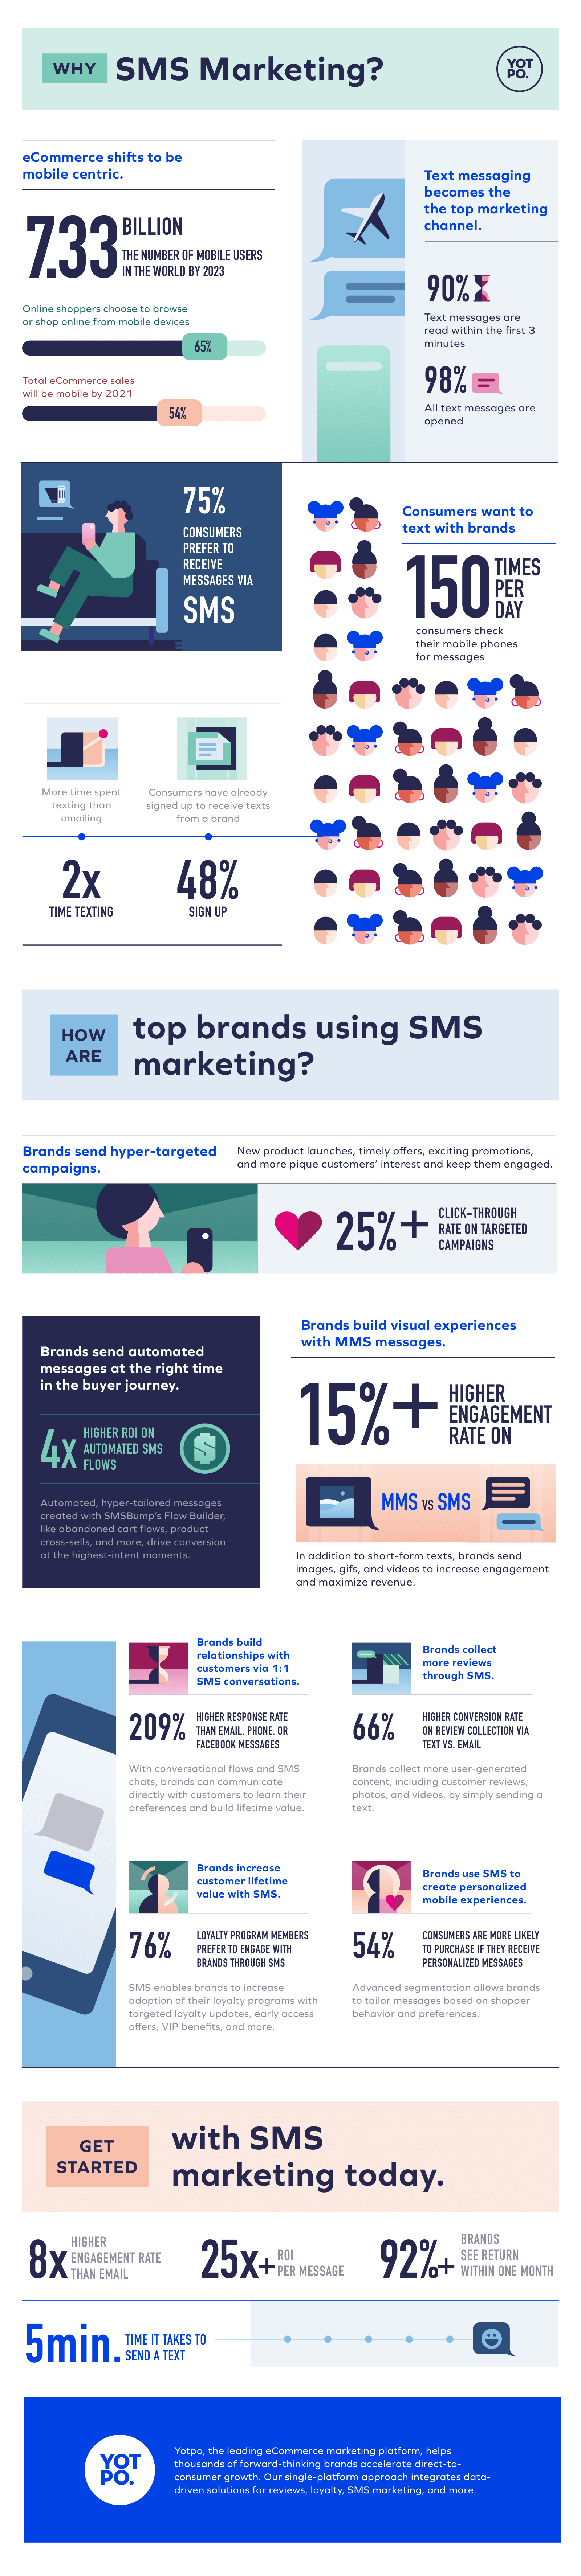 sms infographic